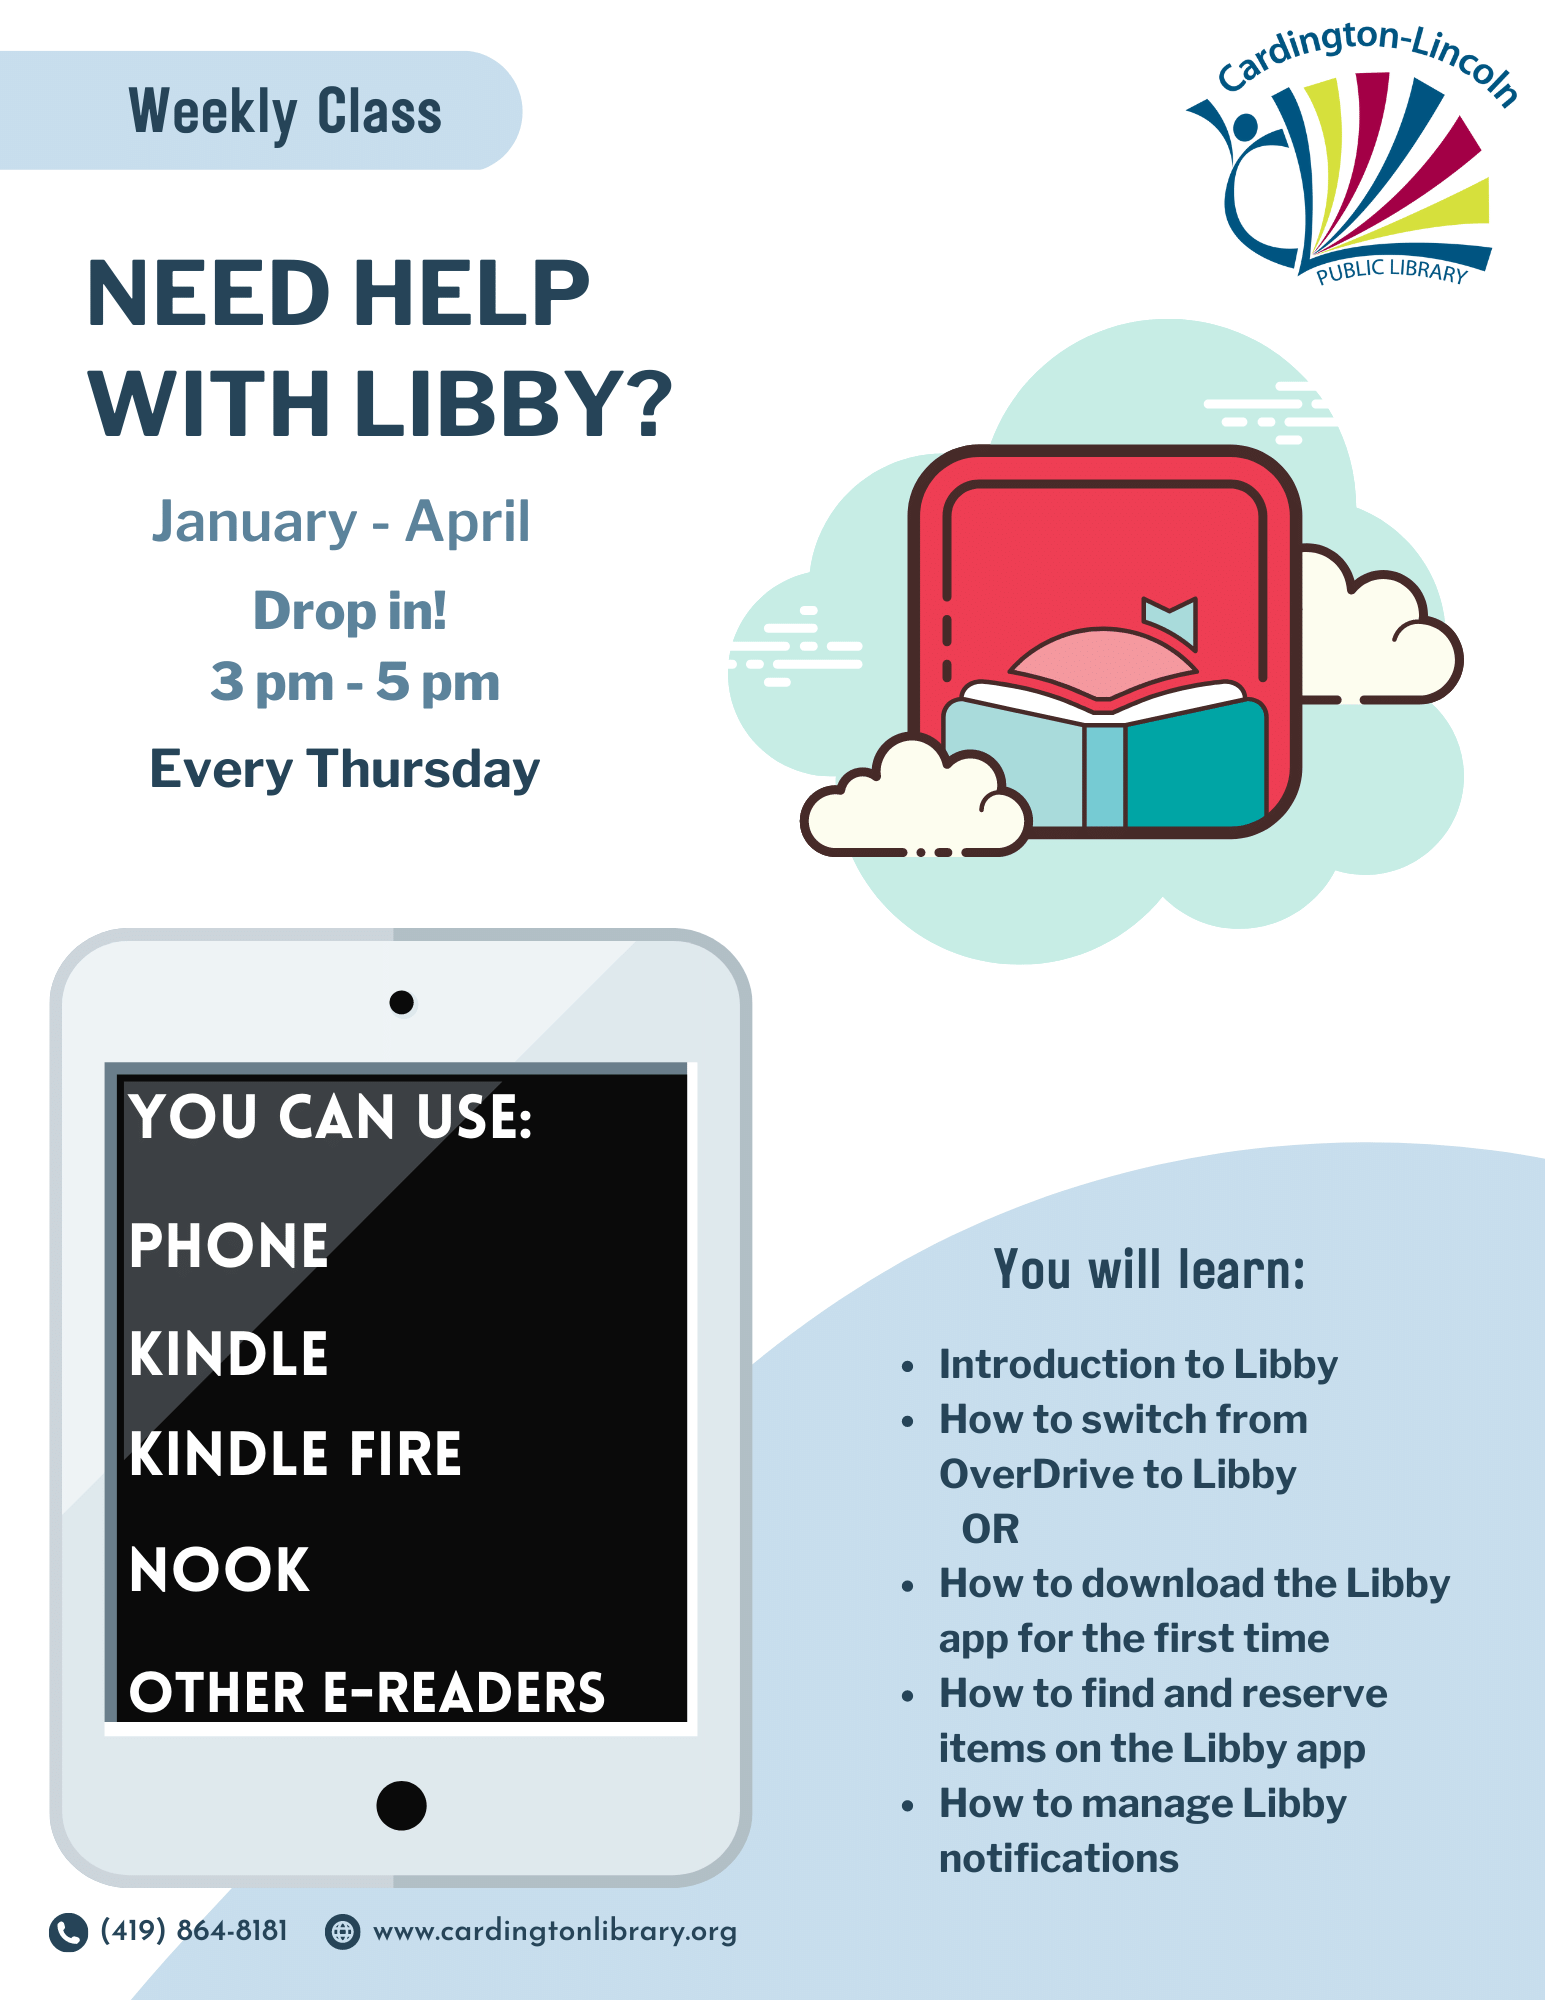 Getting started with Libby class. Drop in on Thursdays between 3pm and 5pm for assistance downloading the app and learning how to use it.